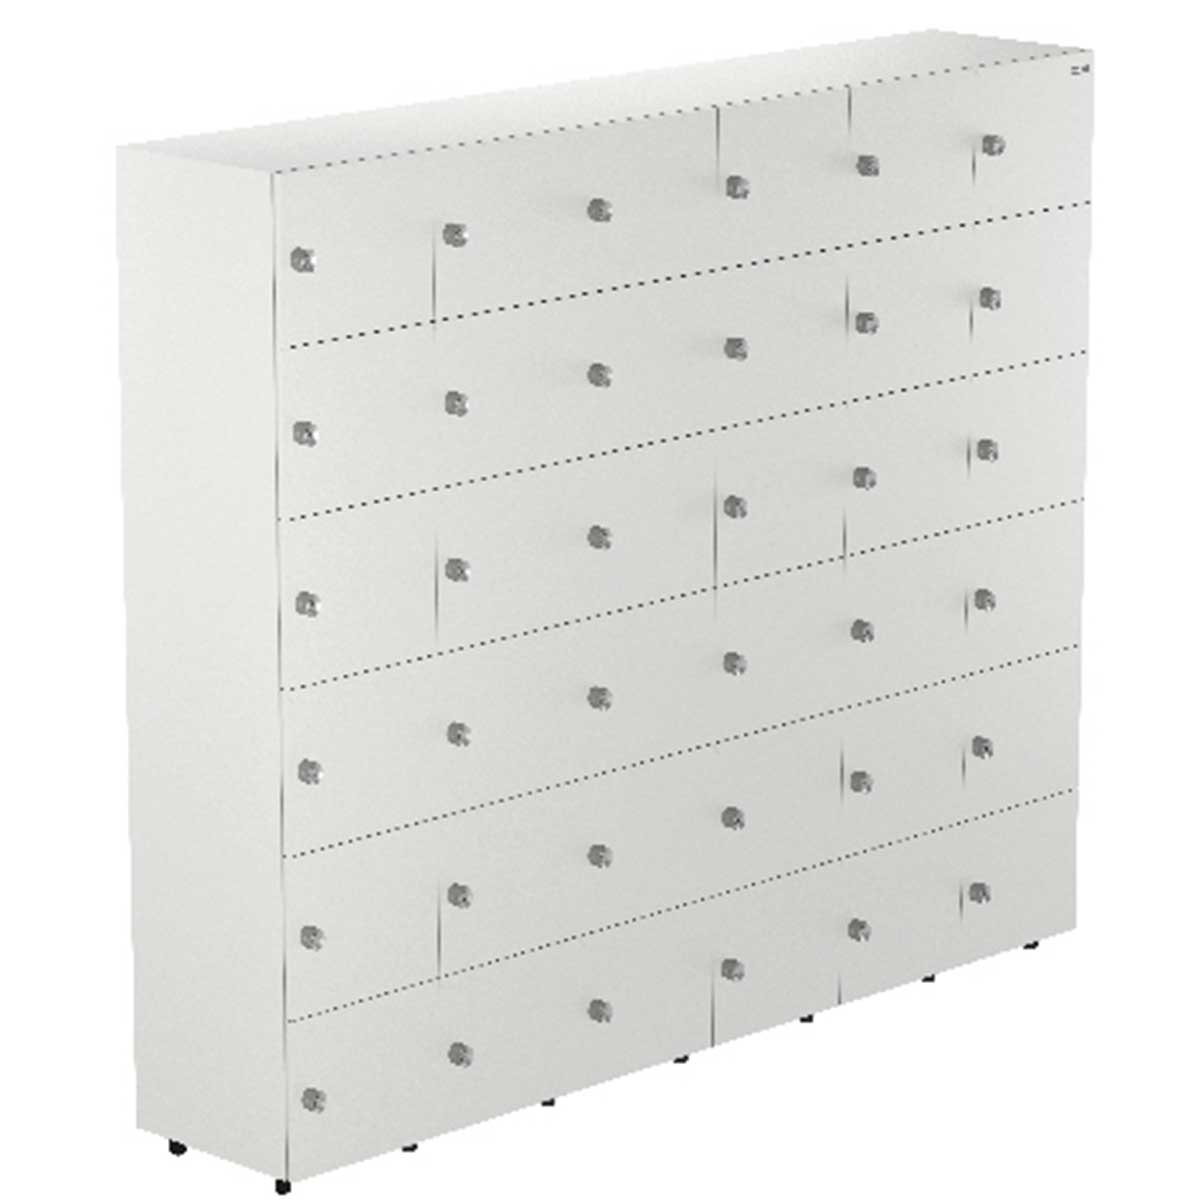 Industrial Locker Manufacturers, Suppliers in Faridabad Sector 14